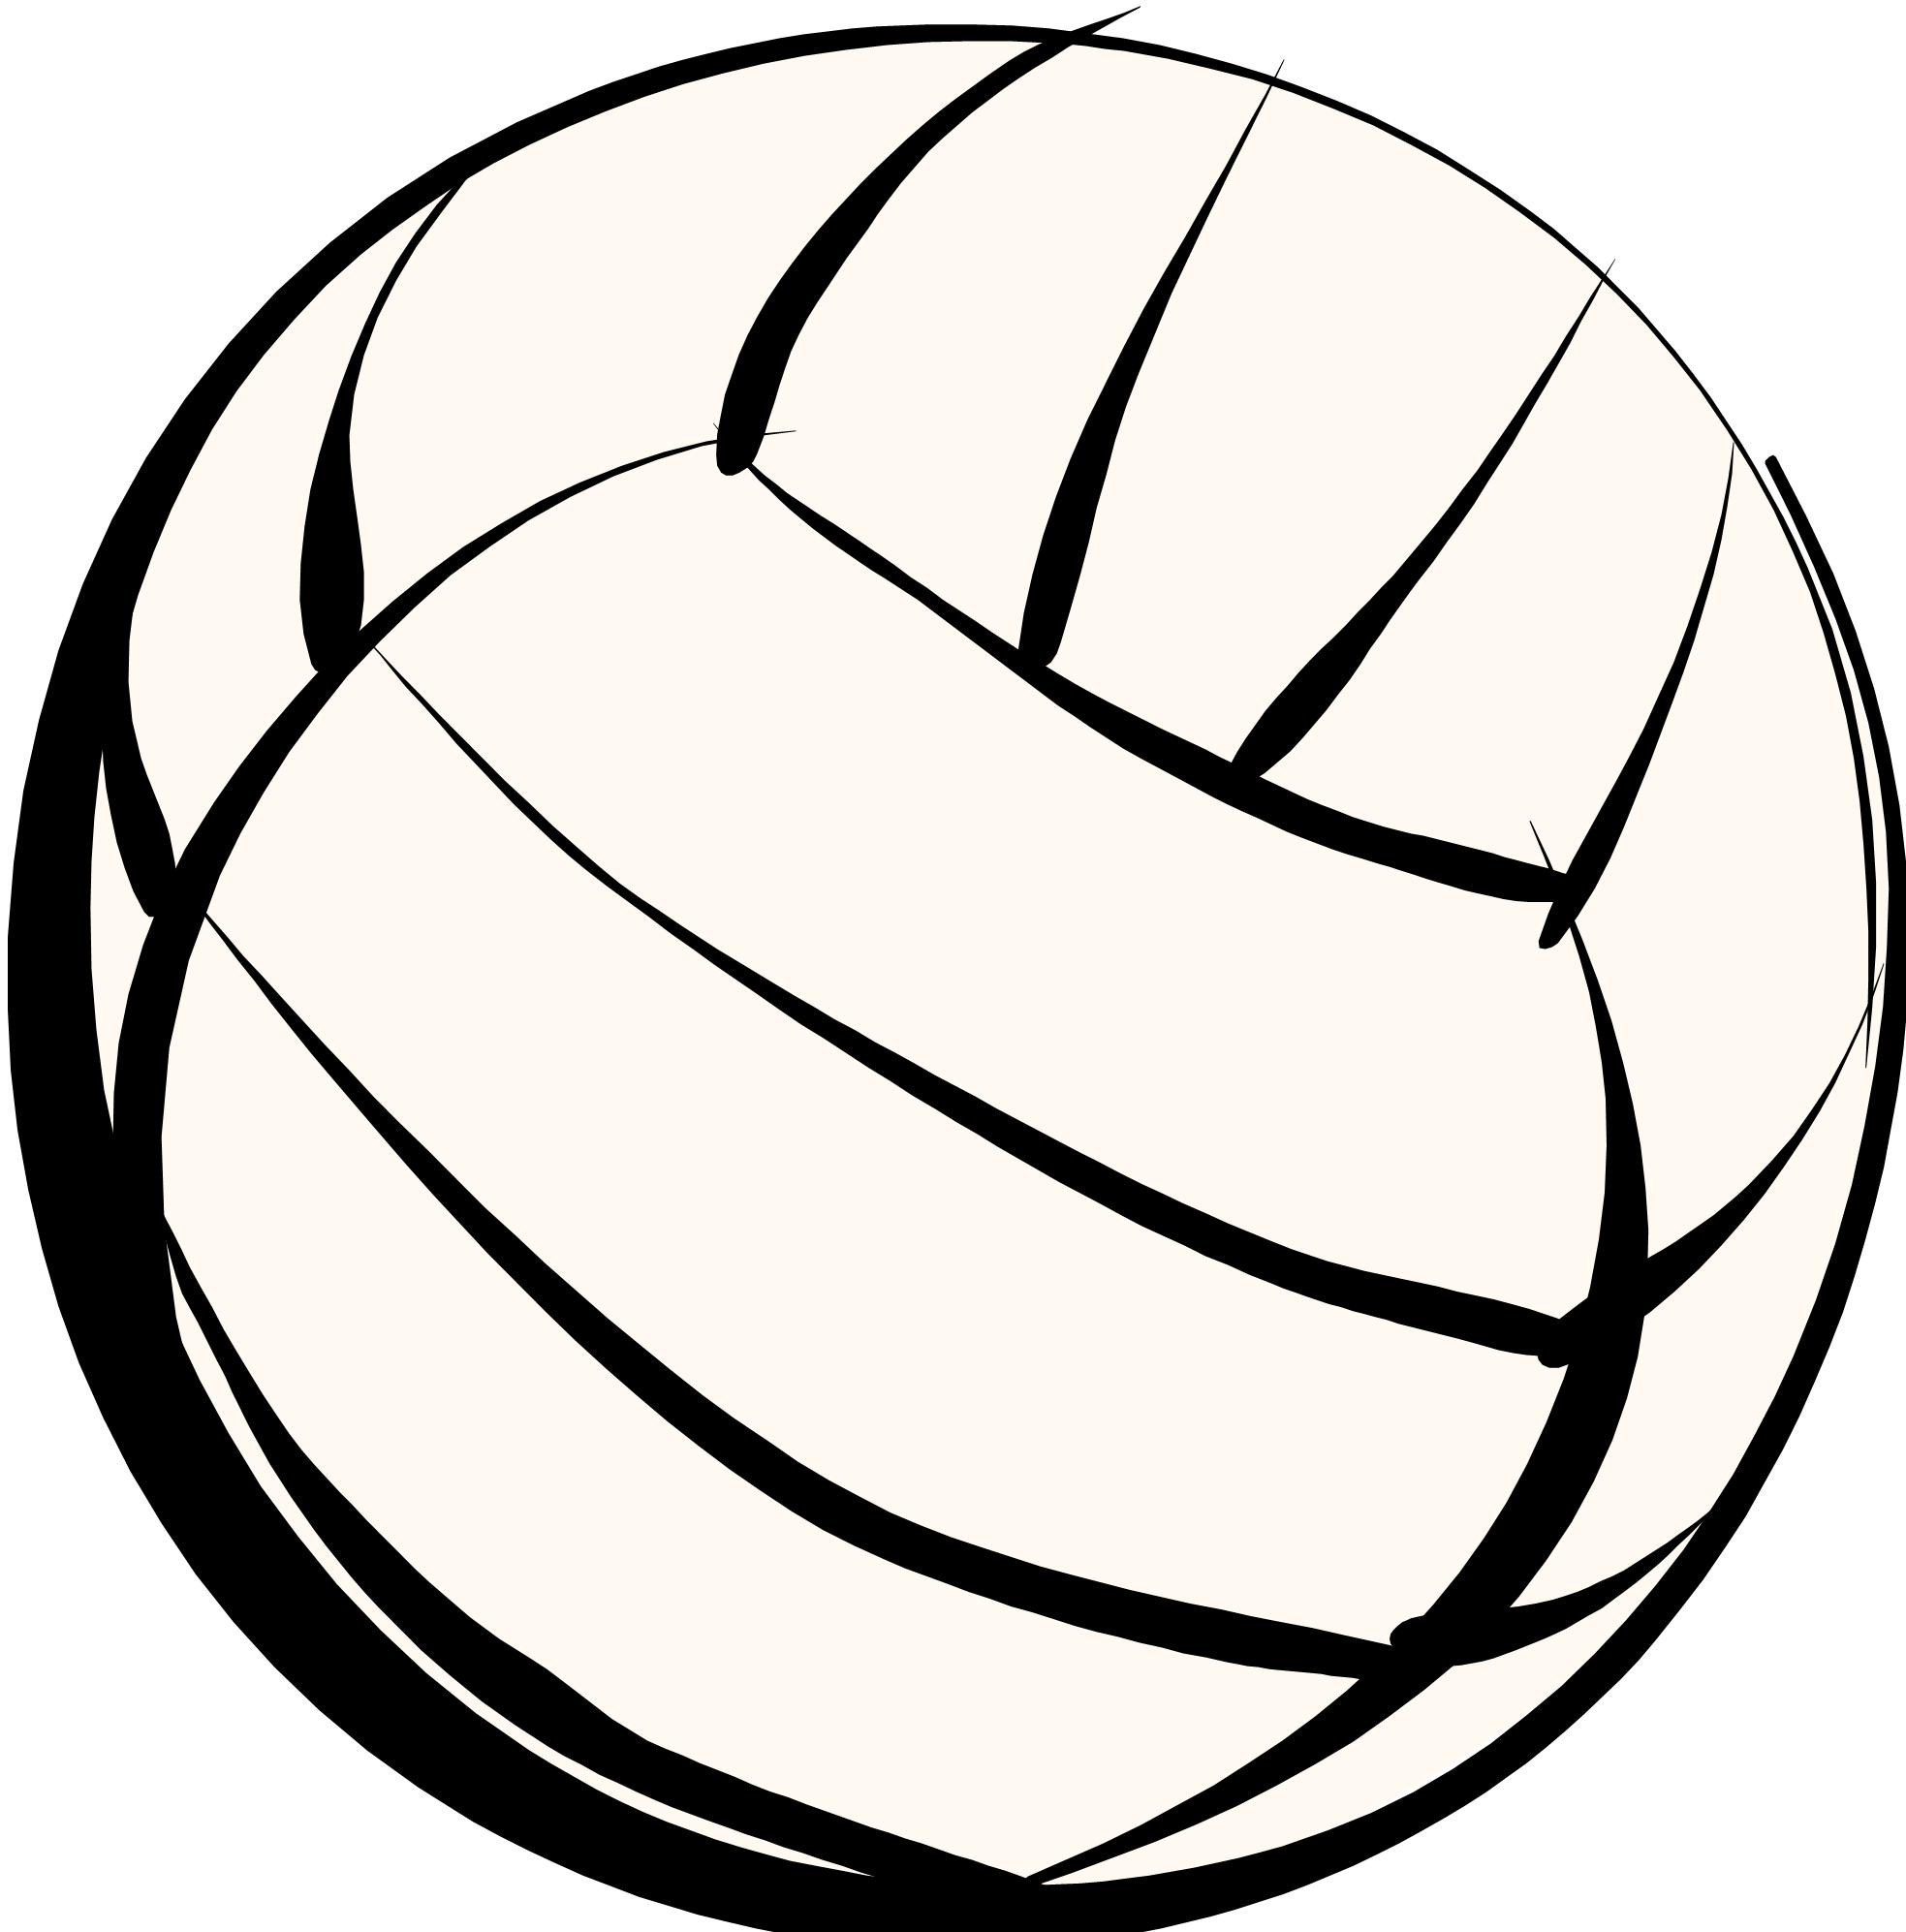 Cool Volleyball Ball Clipart   Clipart Panda   Free Clipart Images